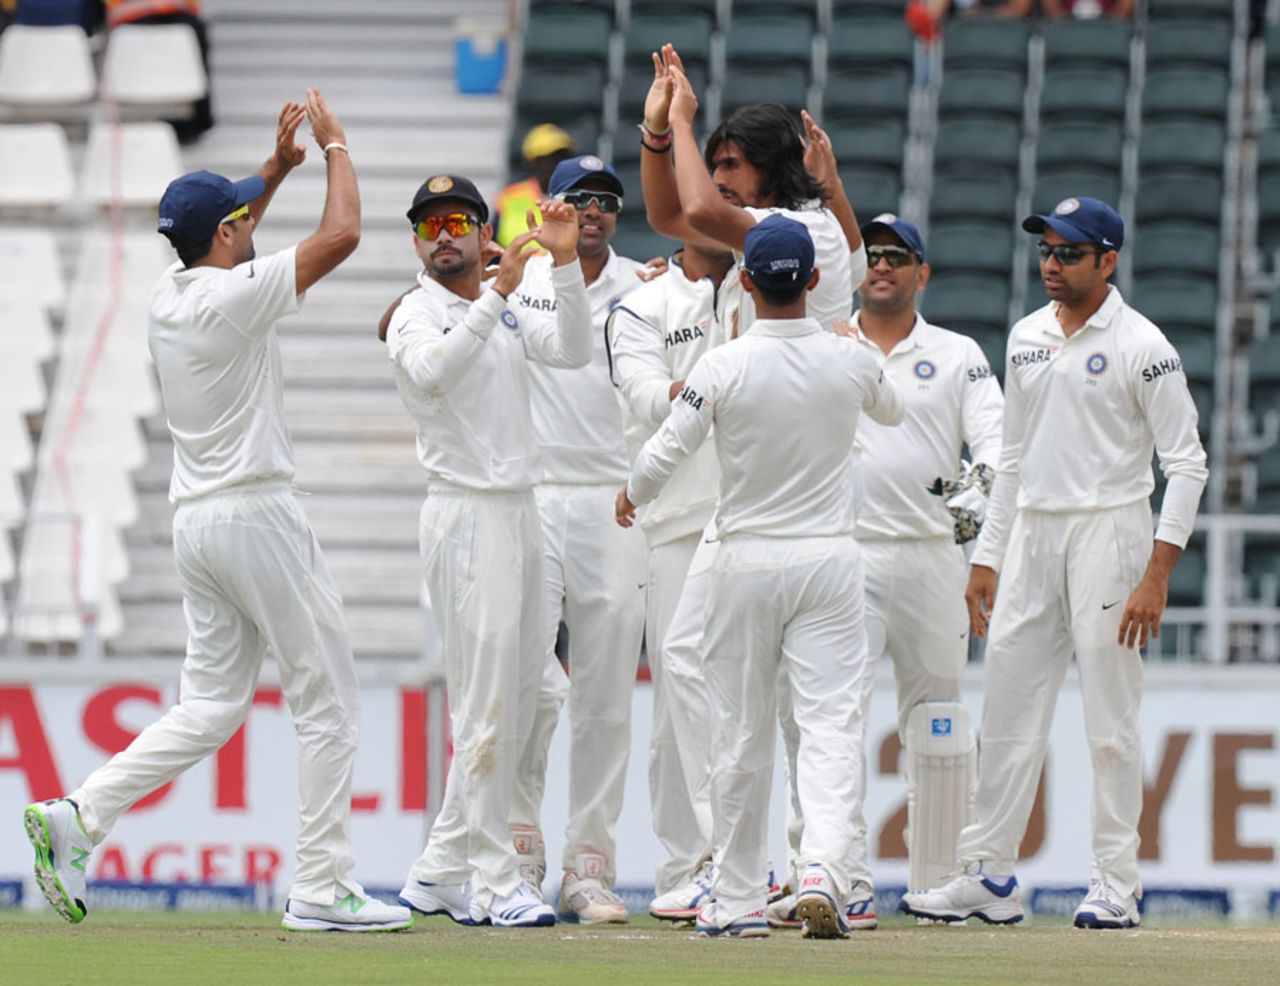 Ishant Sharma is congratulated after picking up the wicket of Alviro Petersen, South Africa v India, 1st Test, Johannesburg, 2nd day, December 19, 2013